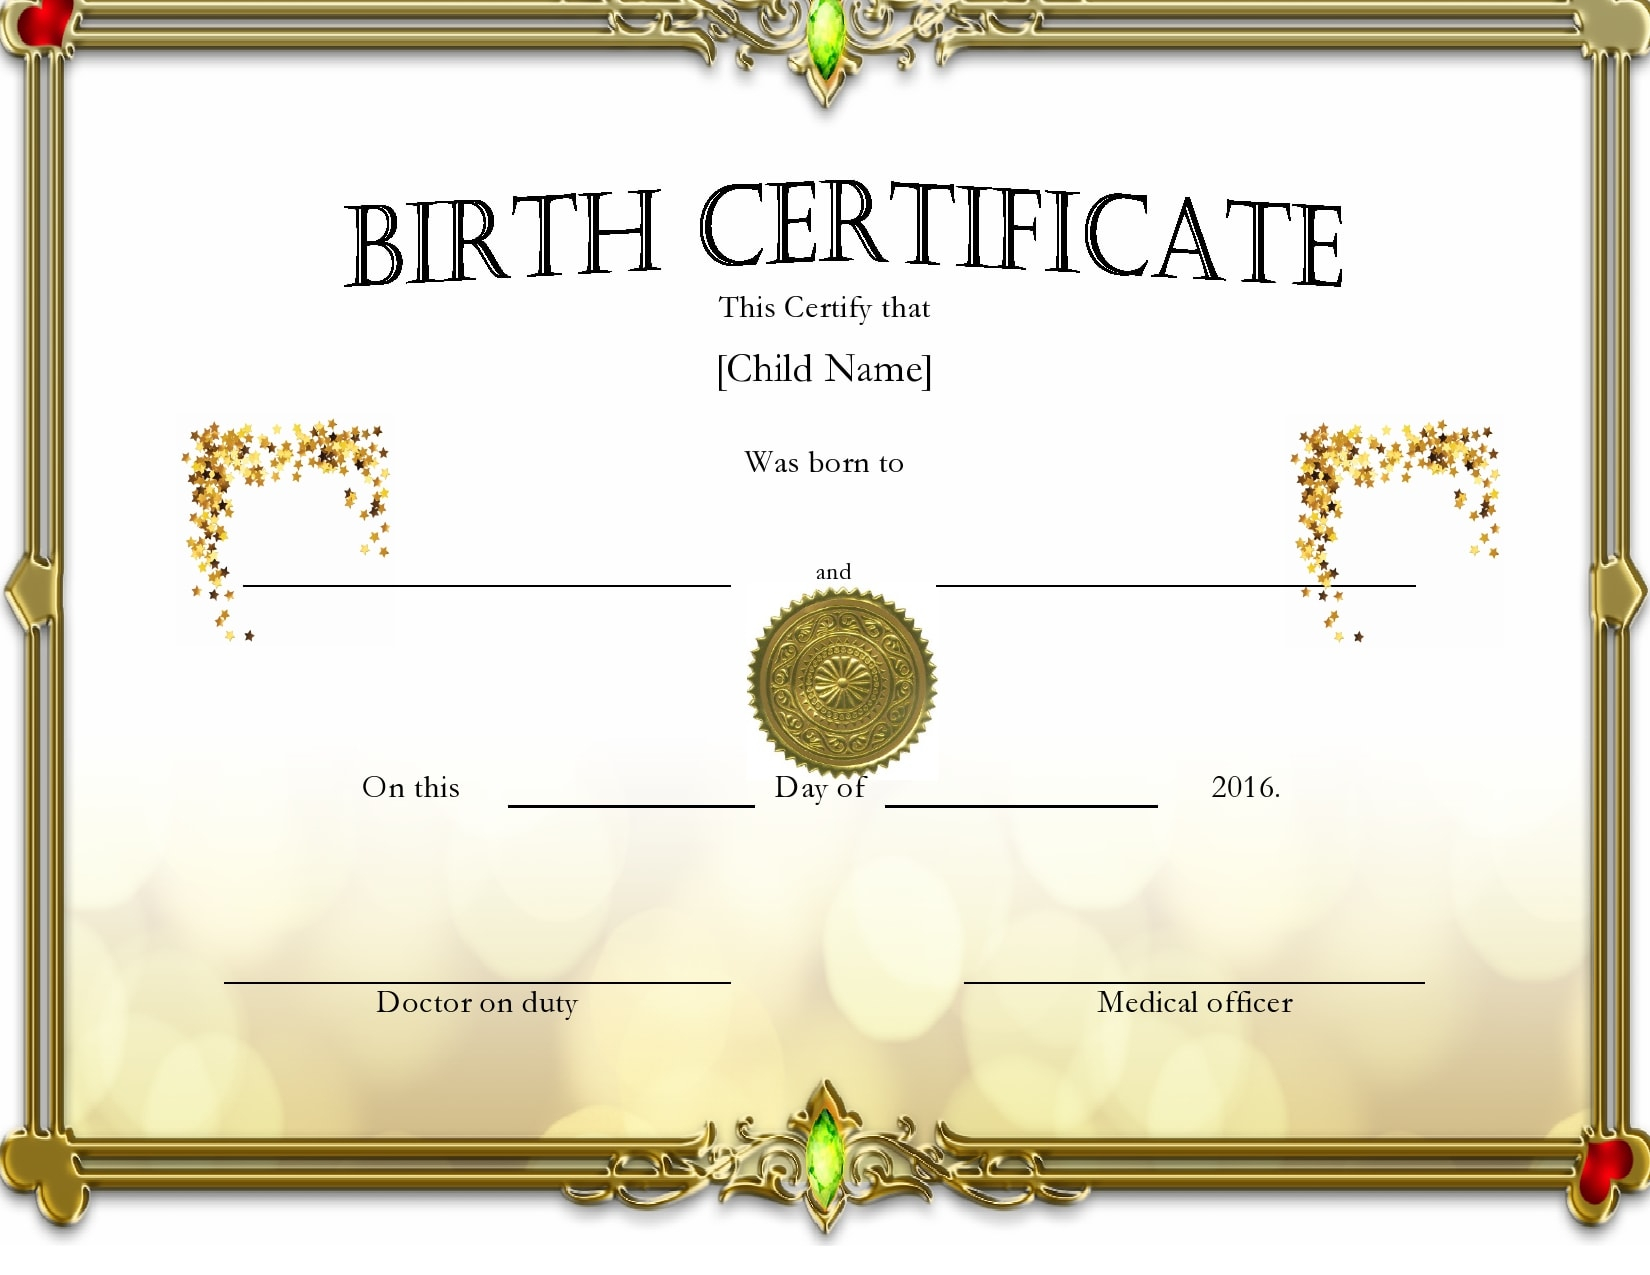 10 Blank Birth Certificate Templates (& Examples) – PrintableTemplates Pertaining To South African Birth Certificate Template